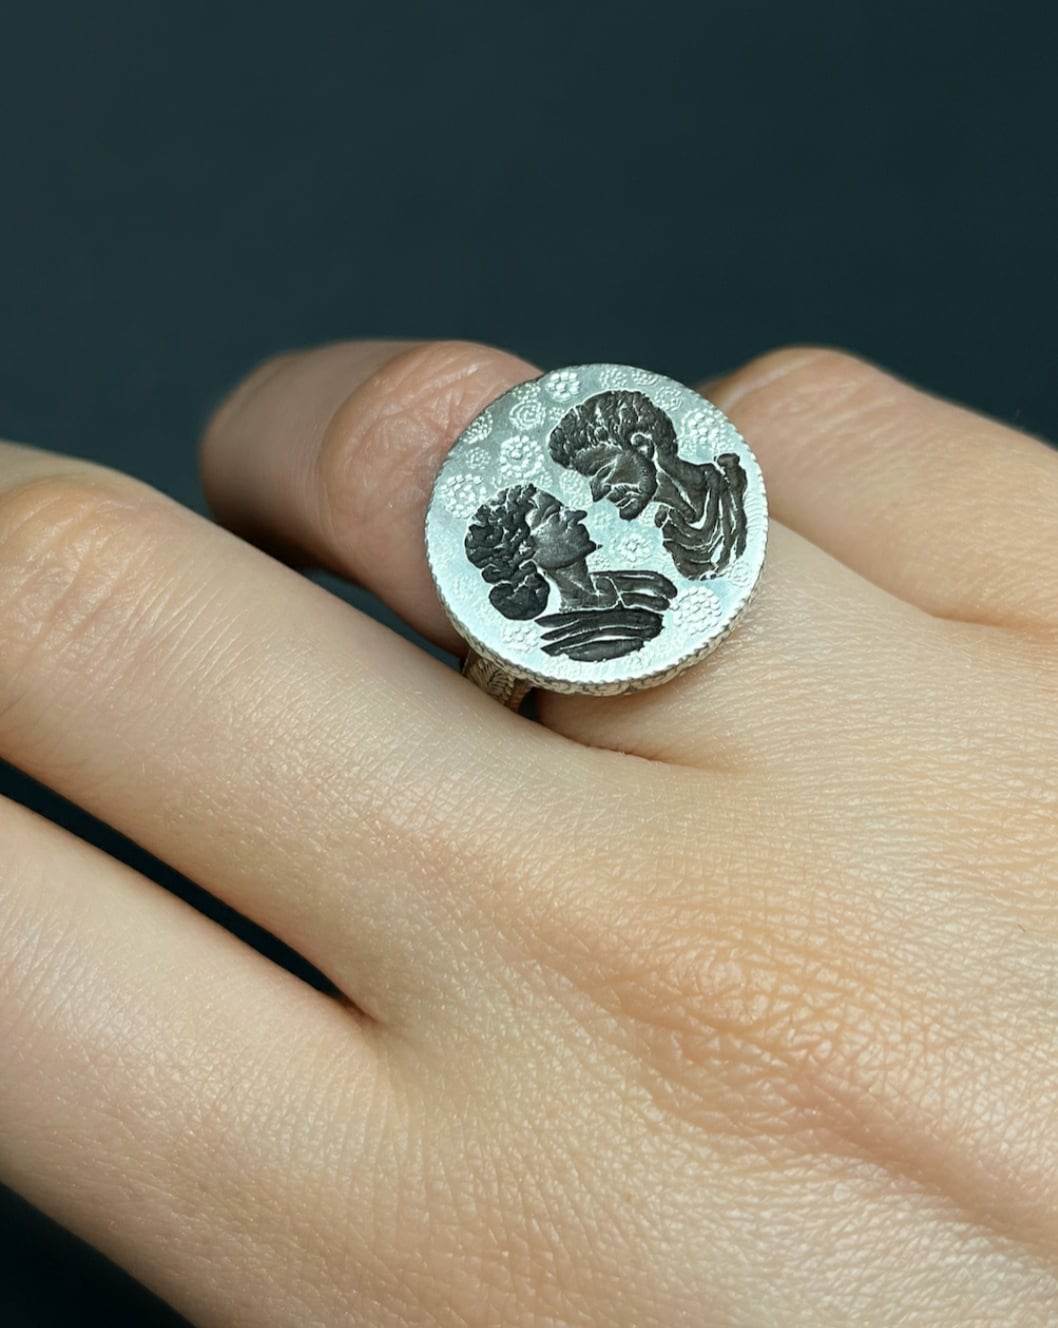 "Adam and Eve" Ring by Elird